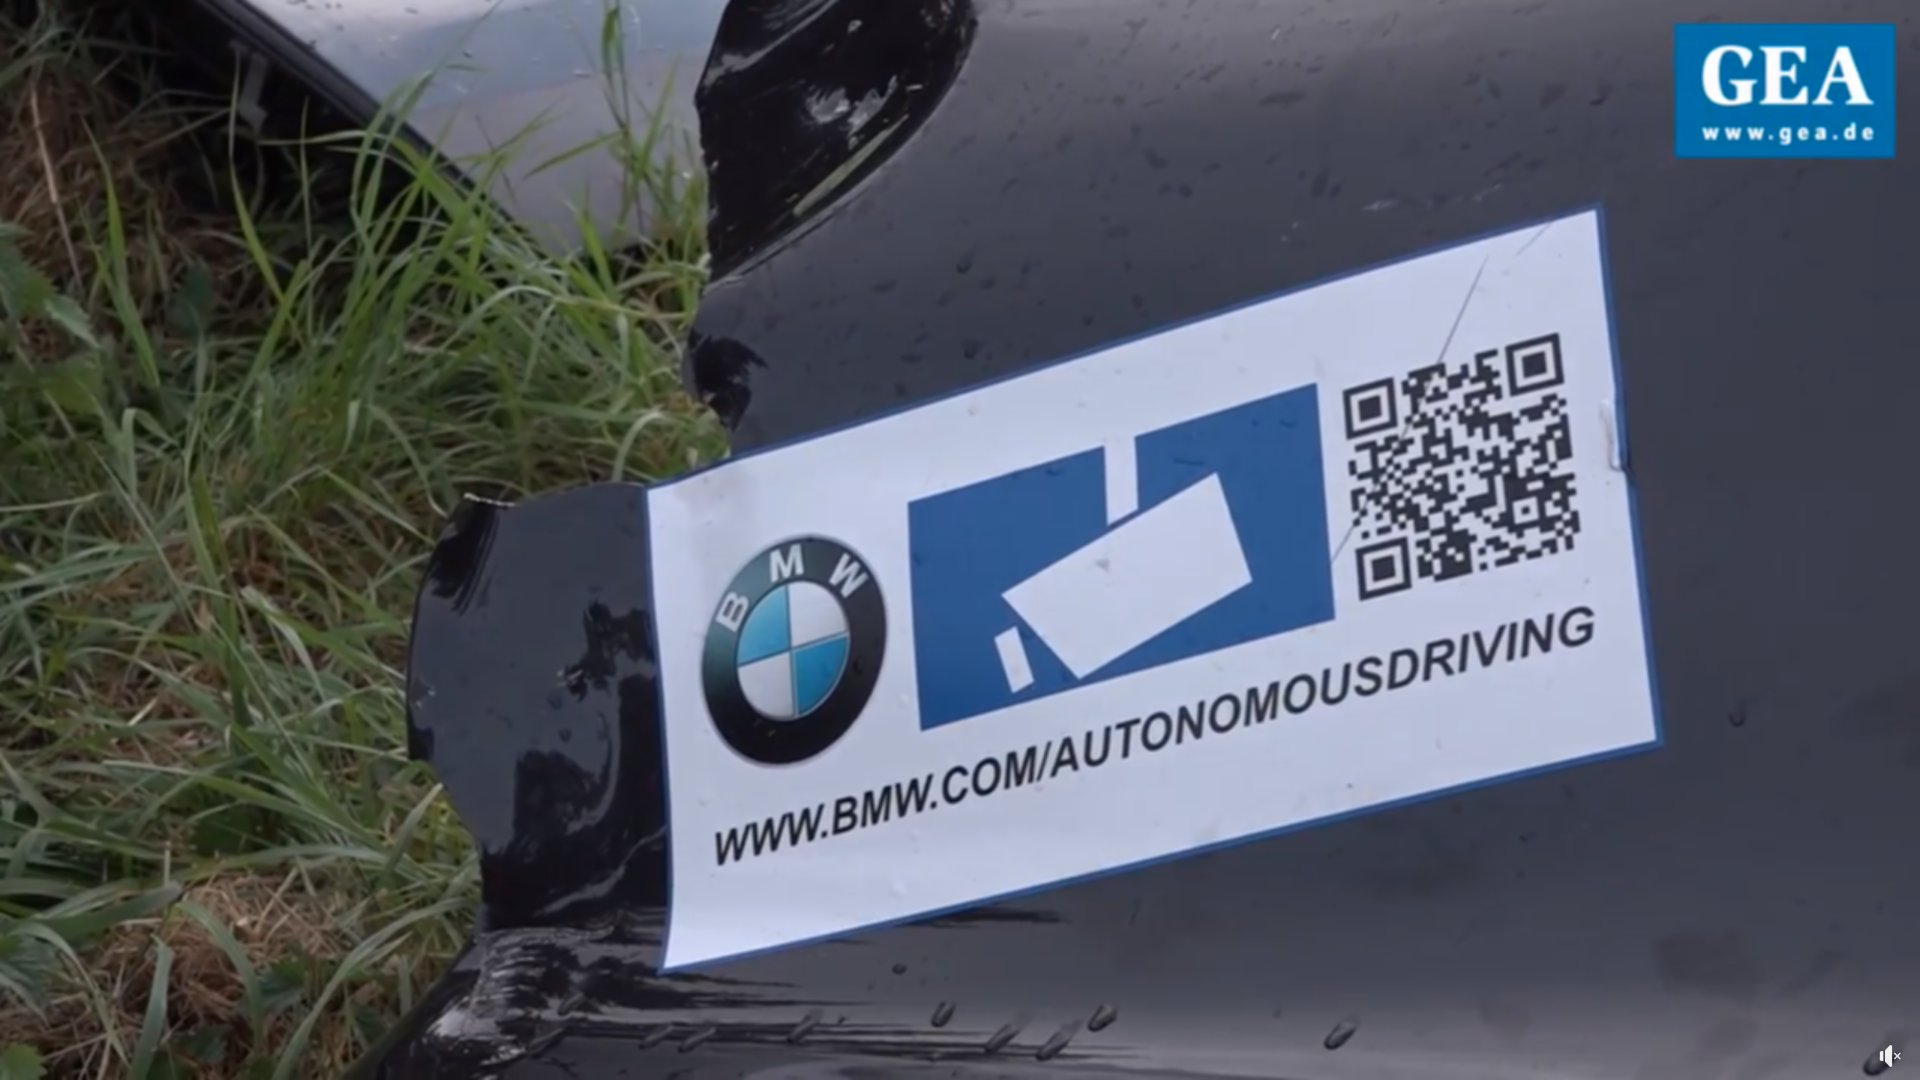 bmw-ix-with-an-autonomous-driving-label-crashes-in-germany-killing-one-injuring-nine_2.jpg